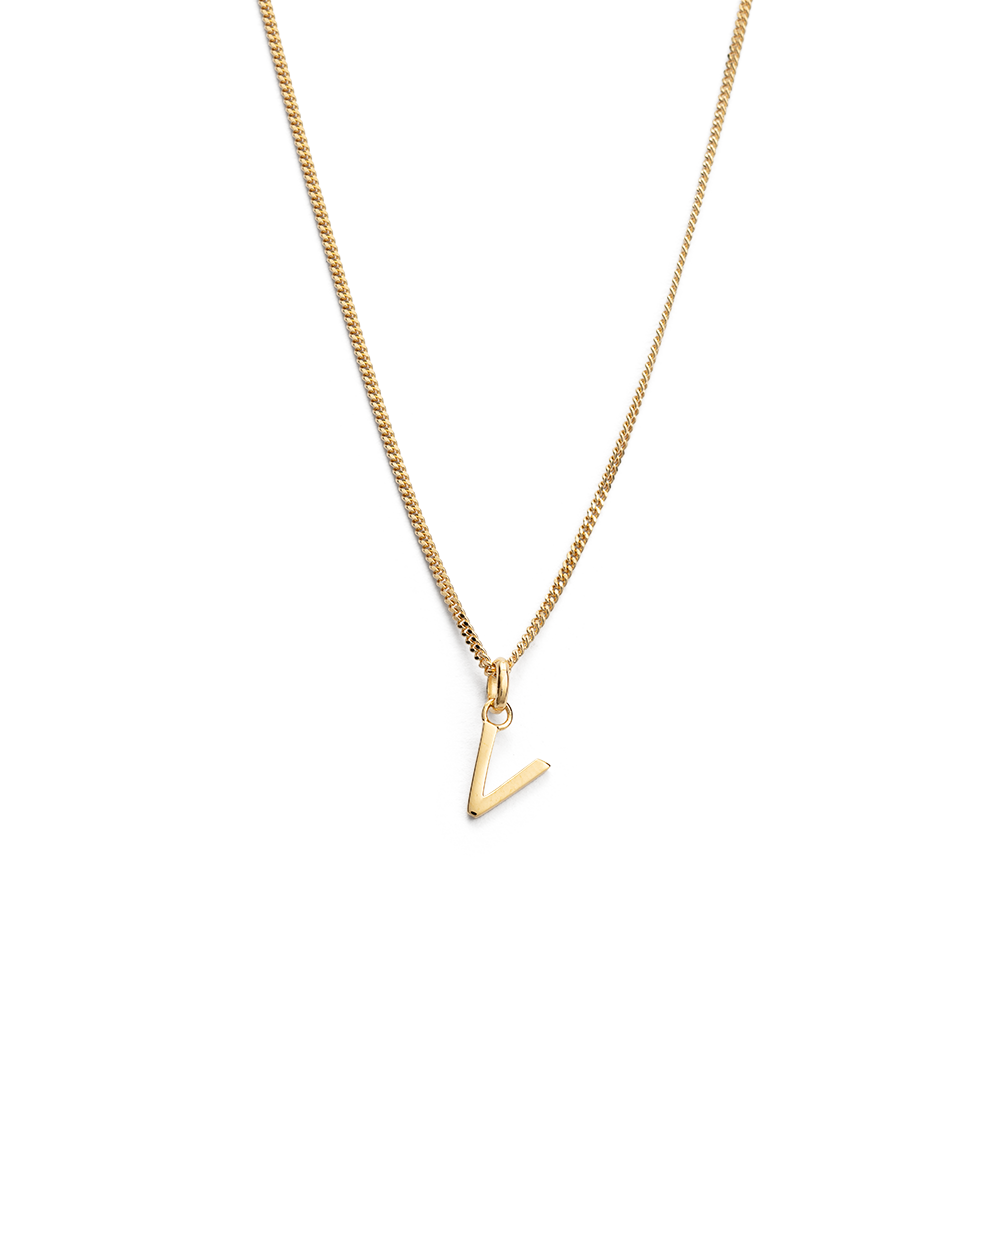 10k Solid Yellow Gold Small Mini Initial Letter V Pendant Necklace | eBay